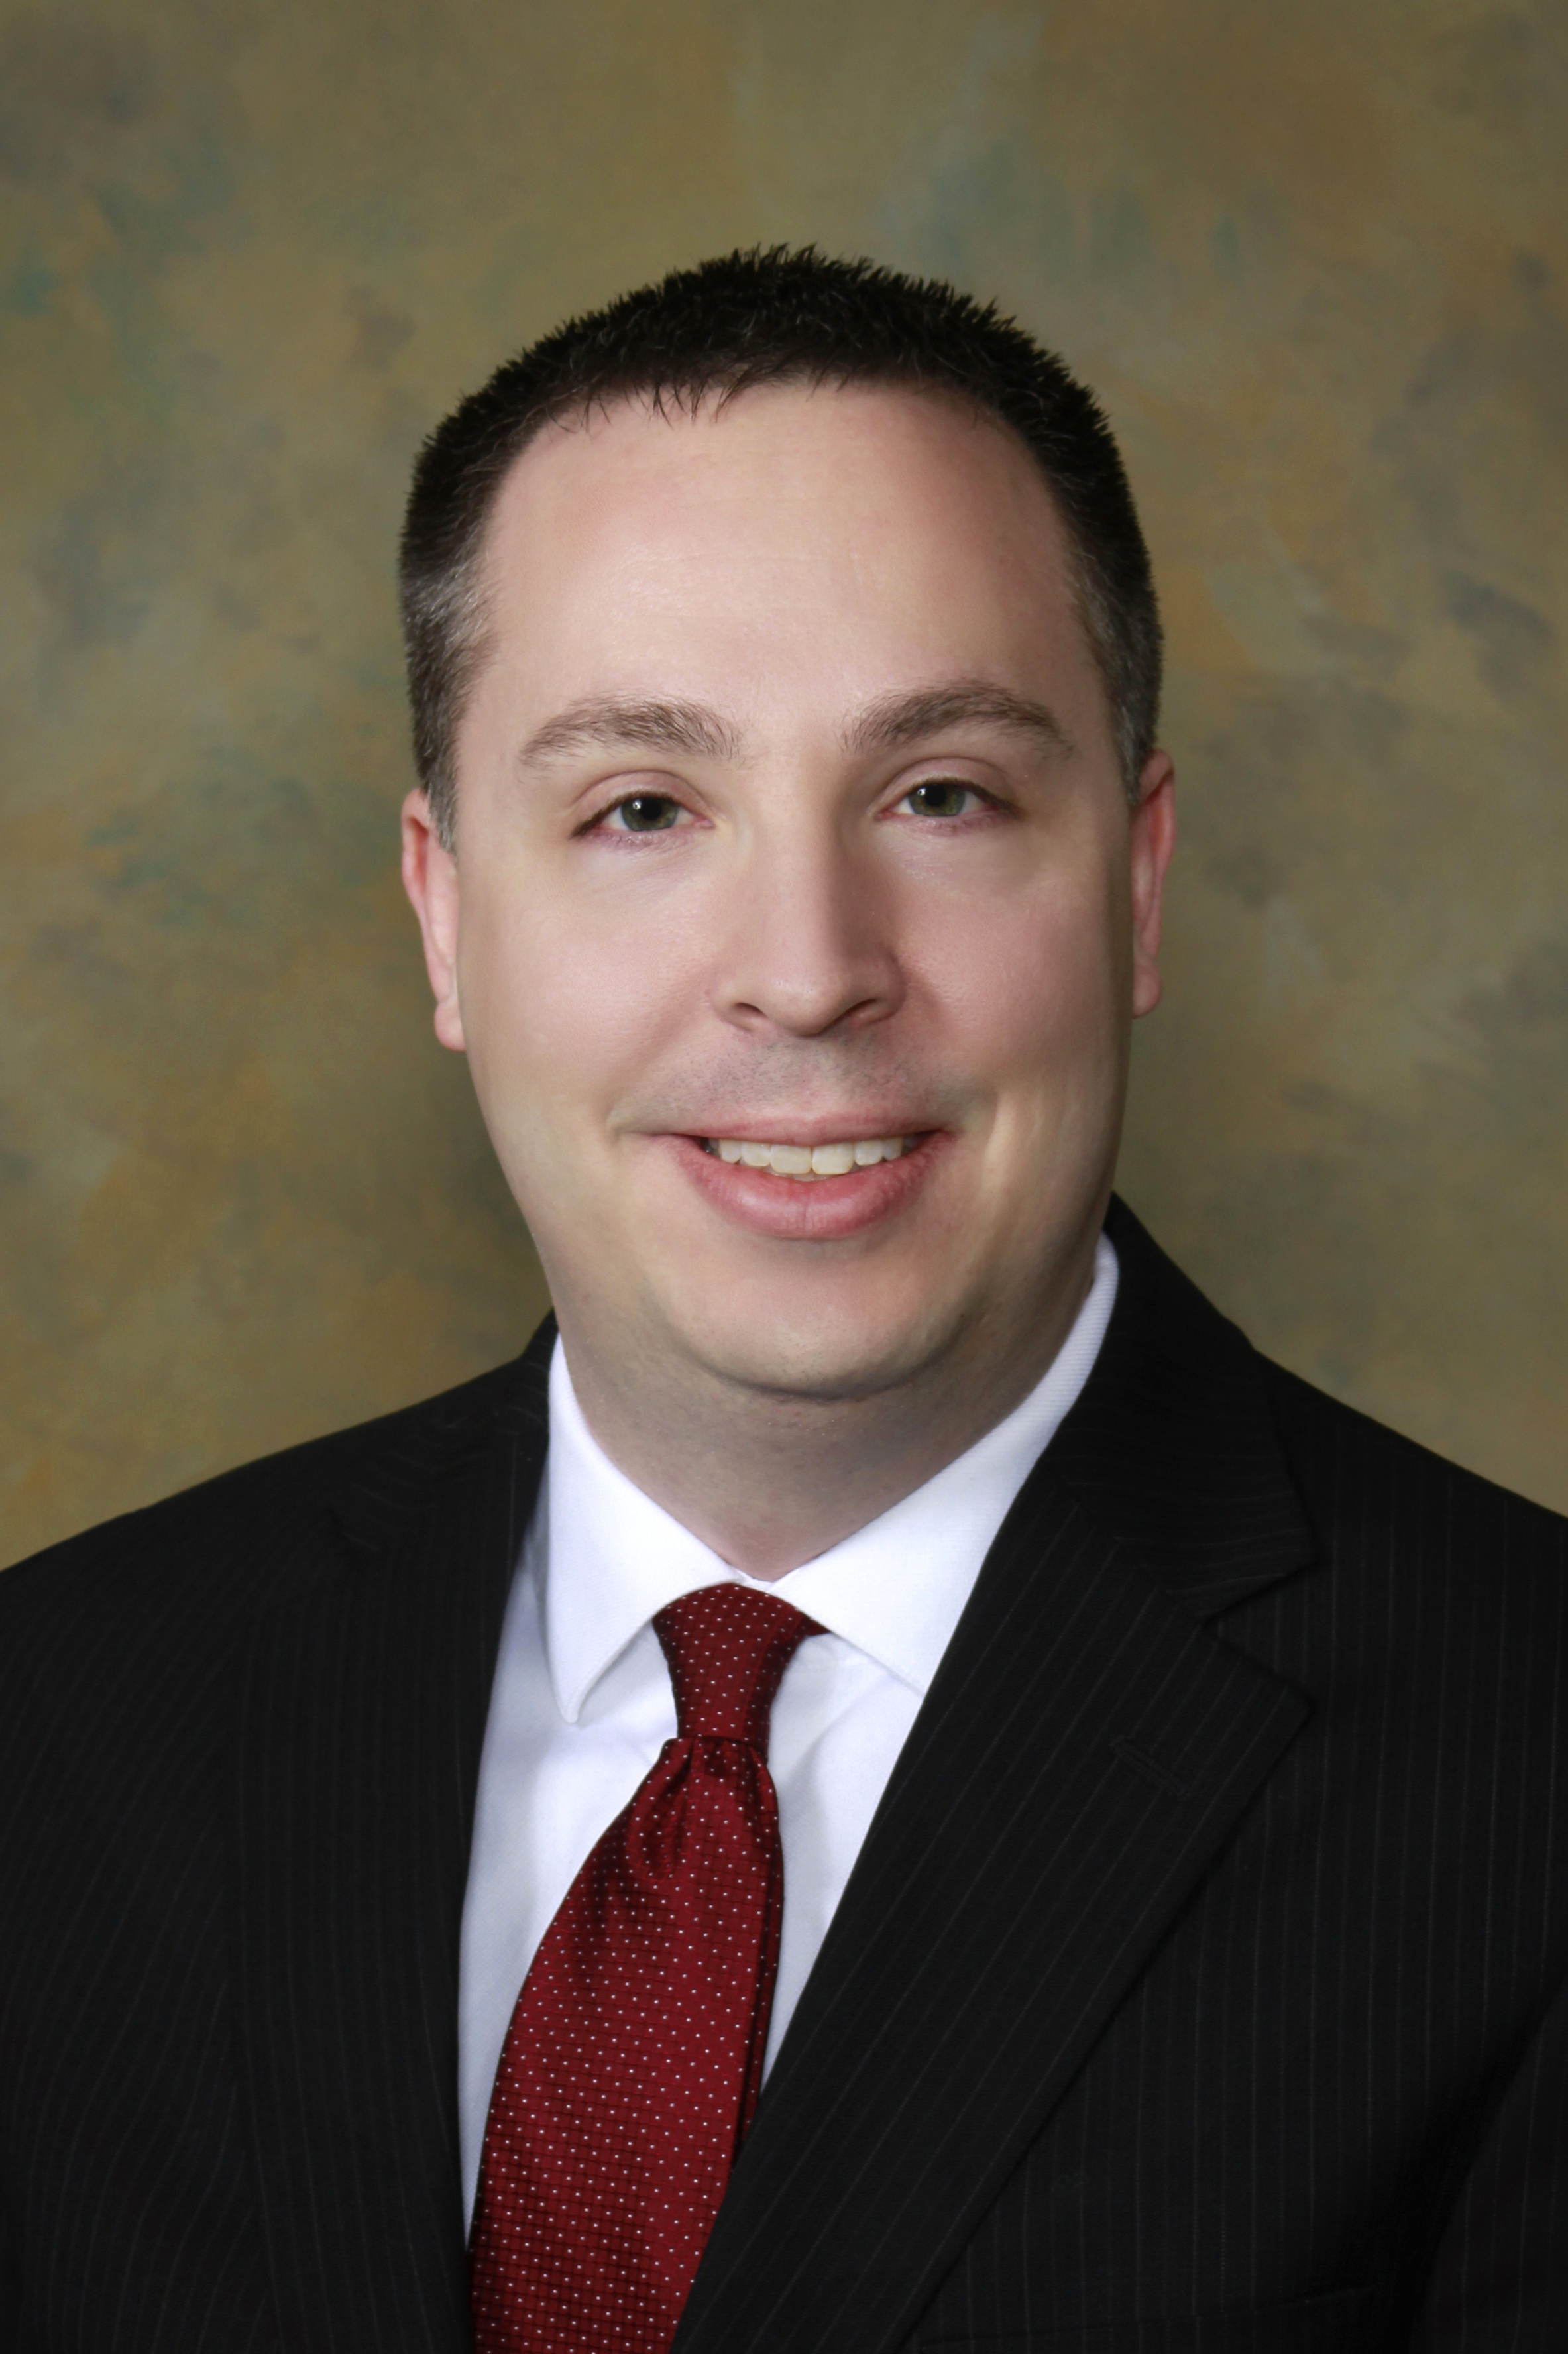 DUI Attorney Andrew Hoverman - Howard County, MD - DUIAttorney.com